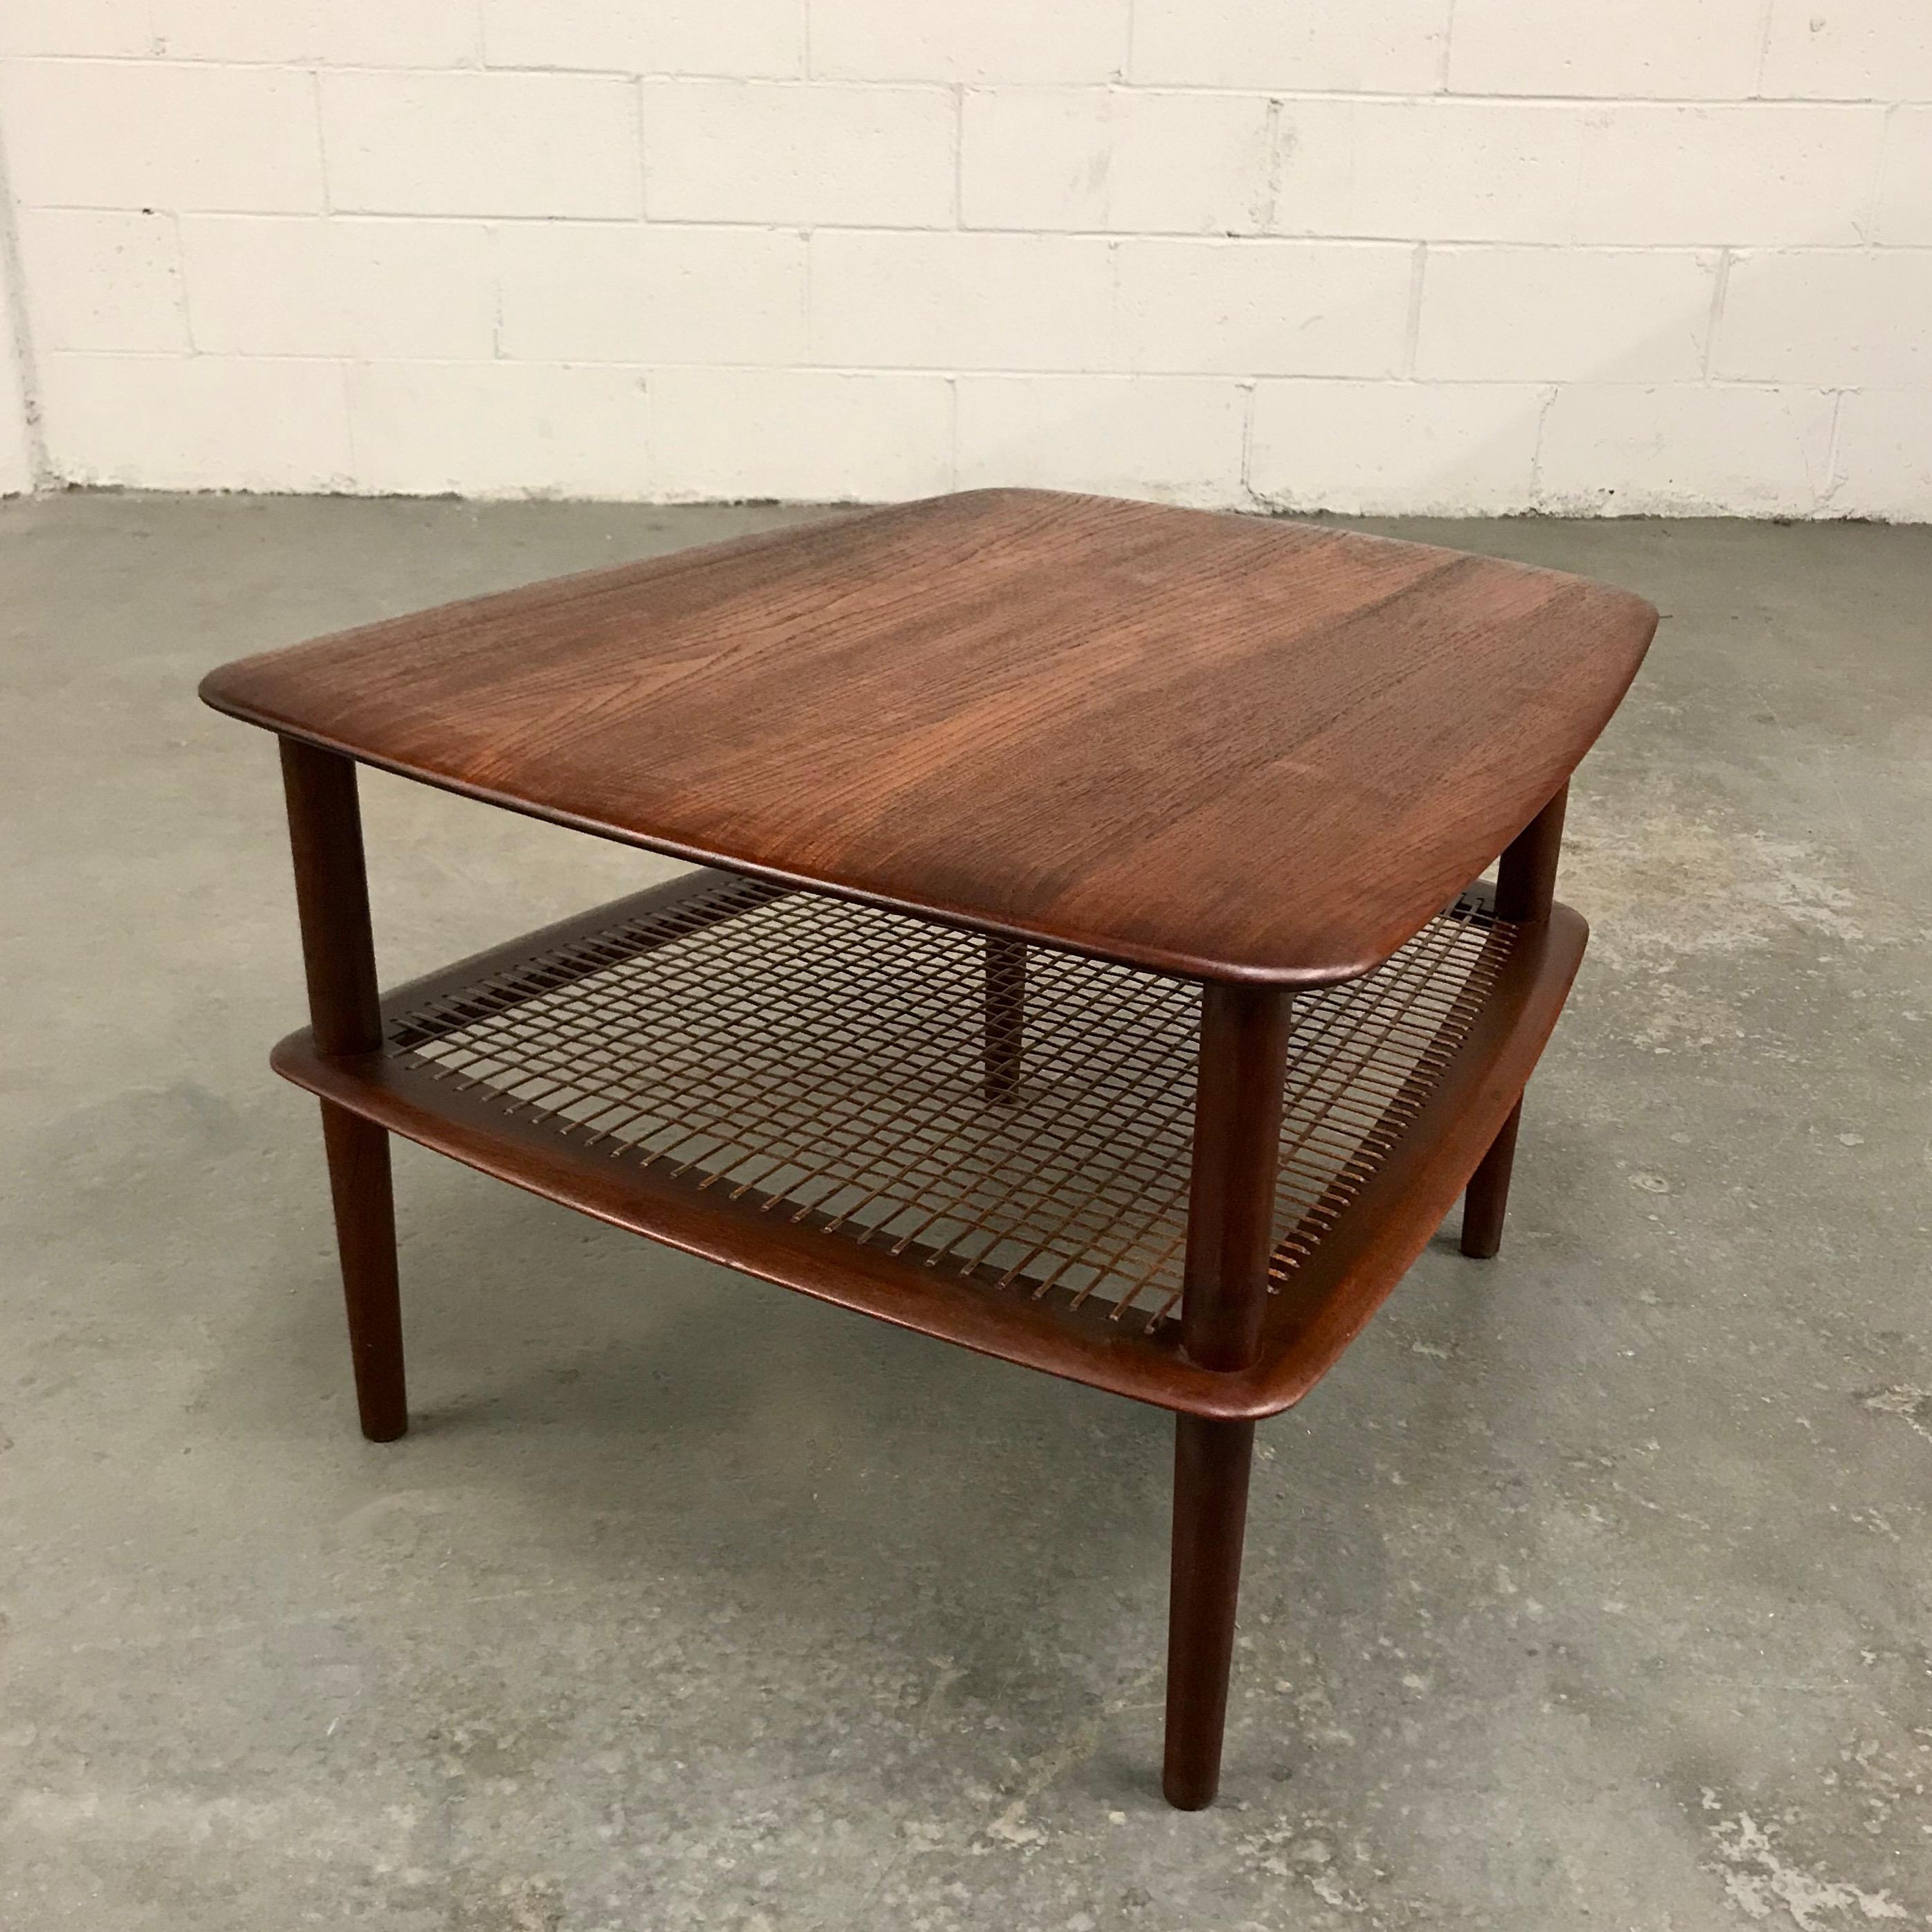 Danish modern, teak side table by Peter Hvidt and Orla Molgaard Nielsen for France & Daverkosen features 2 tiers with caned lower shelf. Measures: The table tapers from 19.5 to 25.5 inches with the lower shelf height at 10 inches.